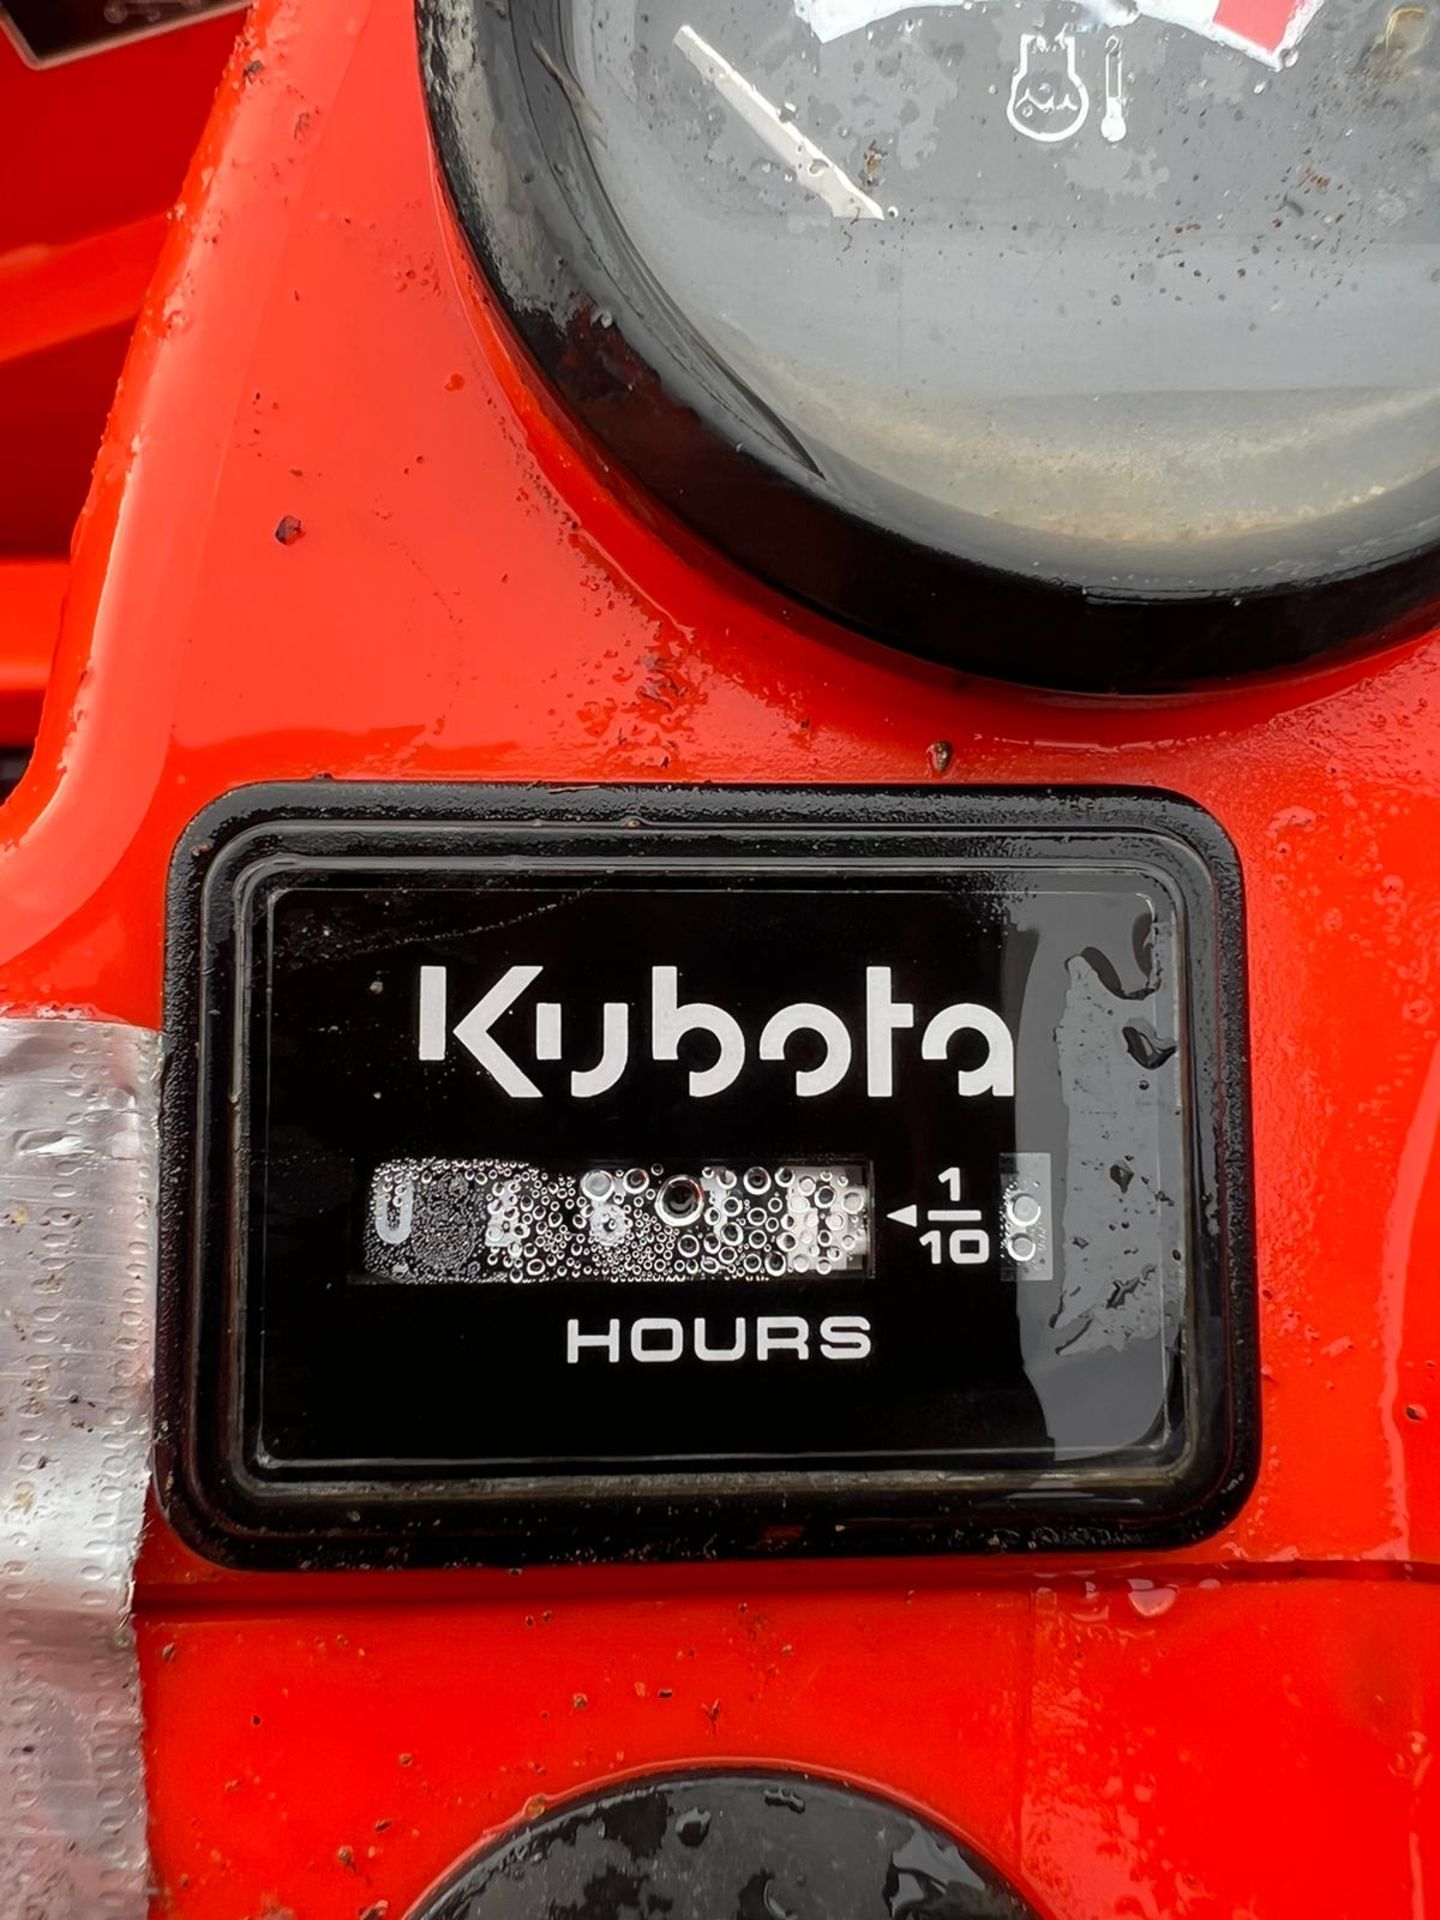 A Kubota F3680-EC 4WD Ride On Mower with 3 blade Mower Deck (one blade missing) and towing hitch, - Image 9 of 13